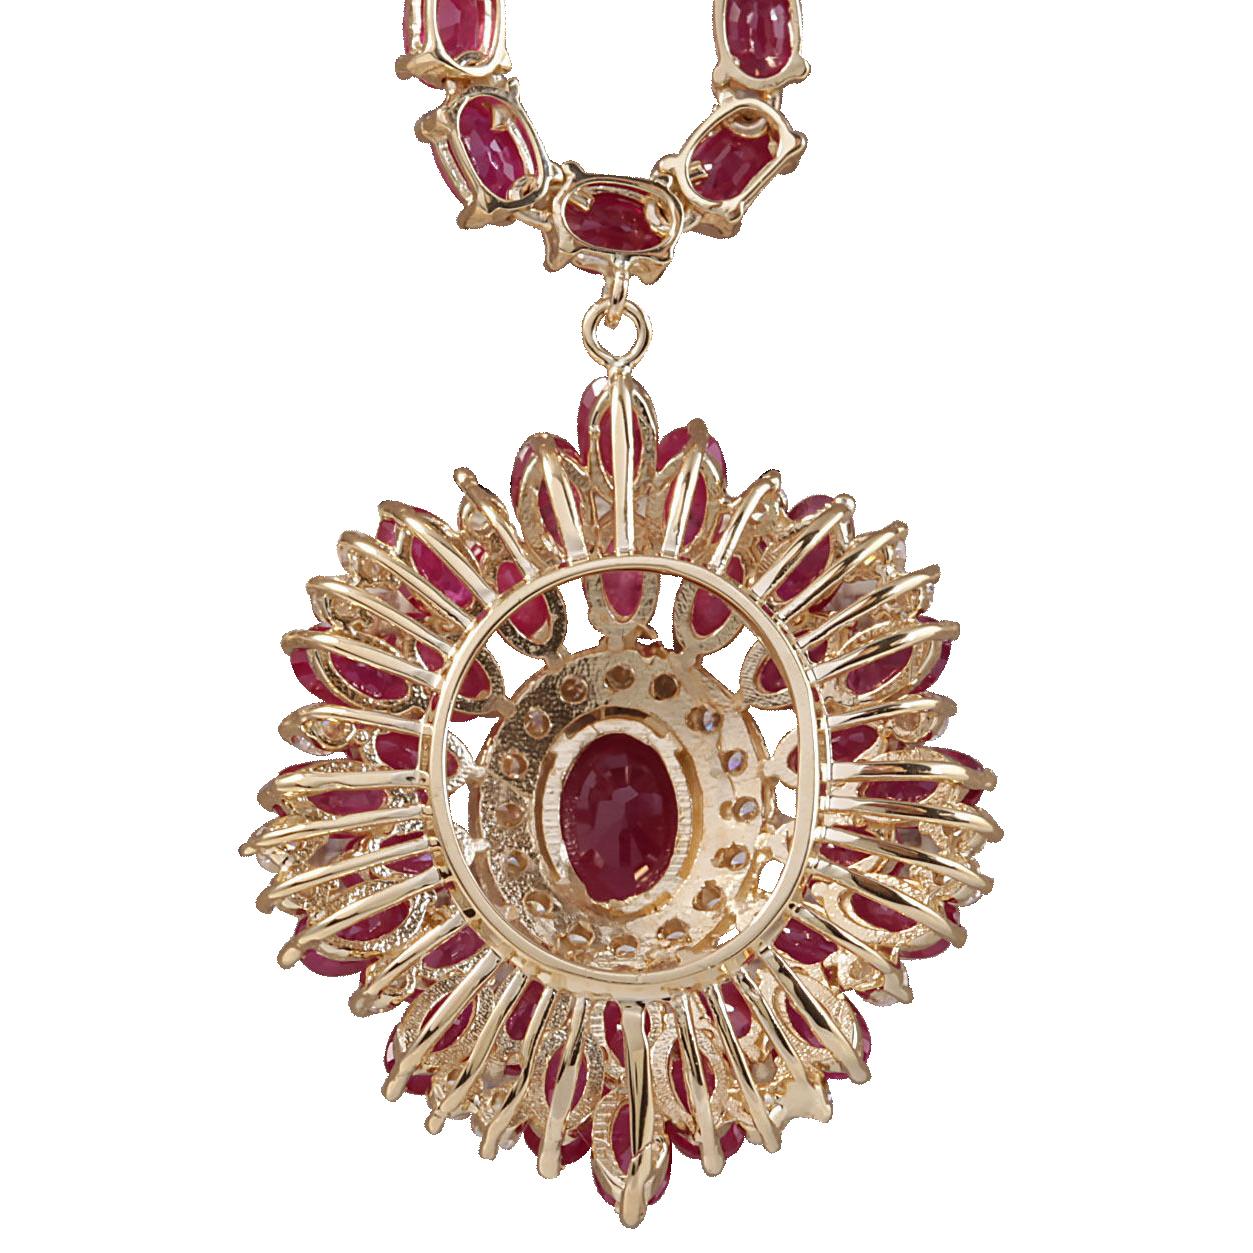 Stamped: 18K Yellow Gold<br />Total Necklace Weight: 25.9 Grams<br />Necklace Length: 17 Inches<br />Necklace Width: N/A<br />Gemstone Weight: Total  Center Ruby Weight is 1.00 Carat (Measures: 7.79x6.48 mm)<br />Color: Red<br />Gemstone Weight: